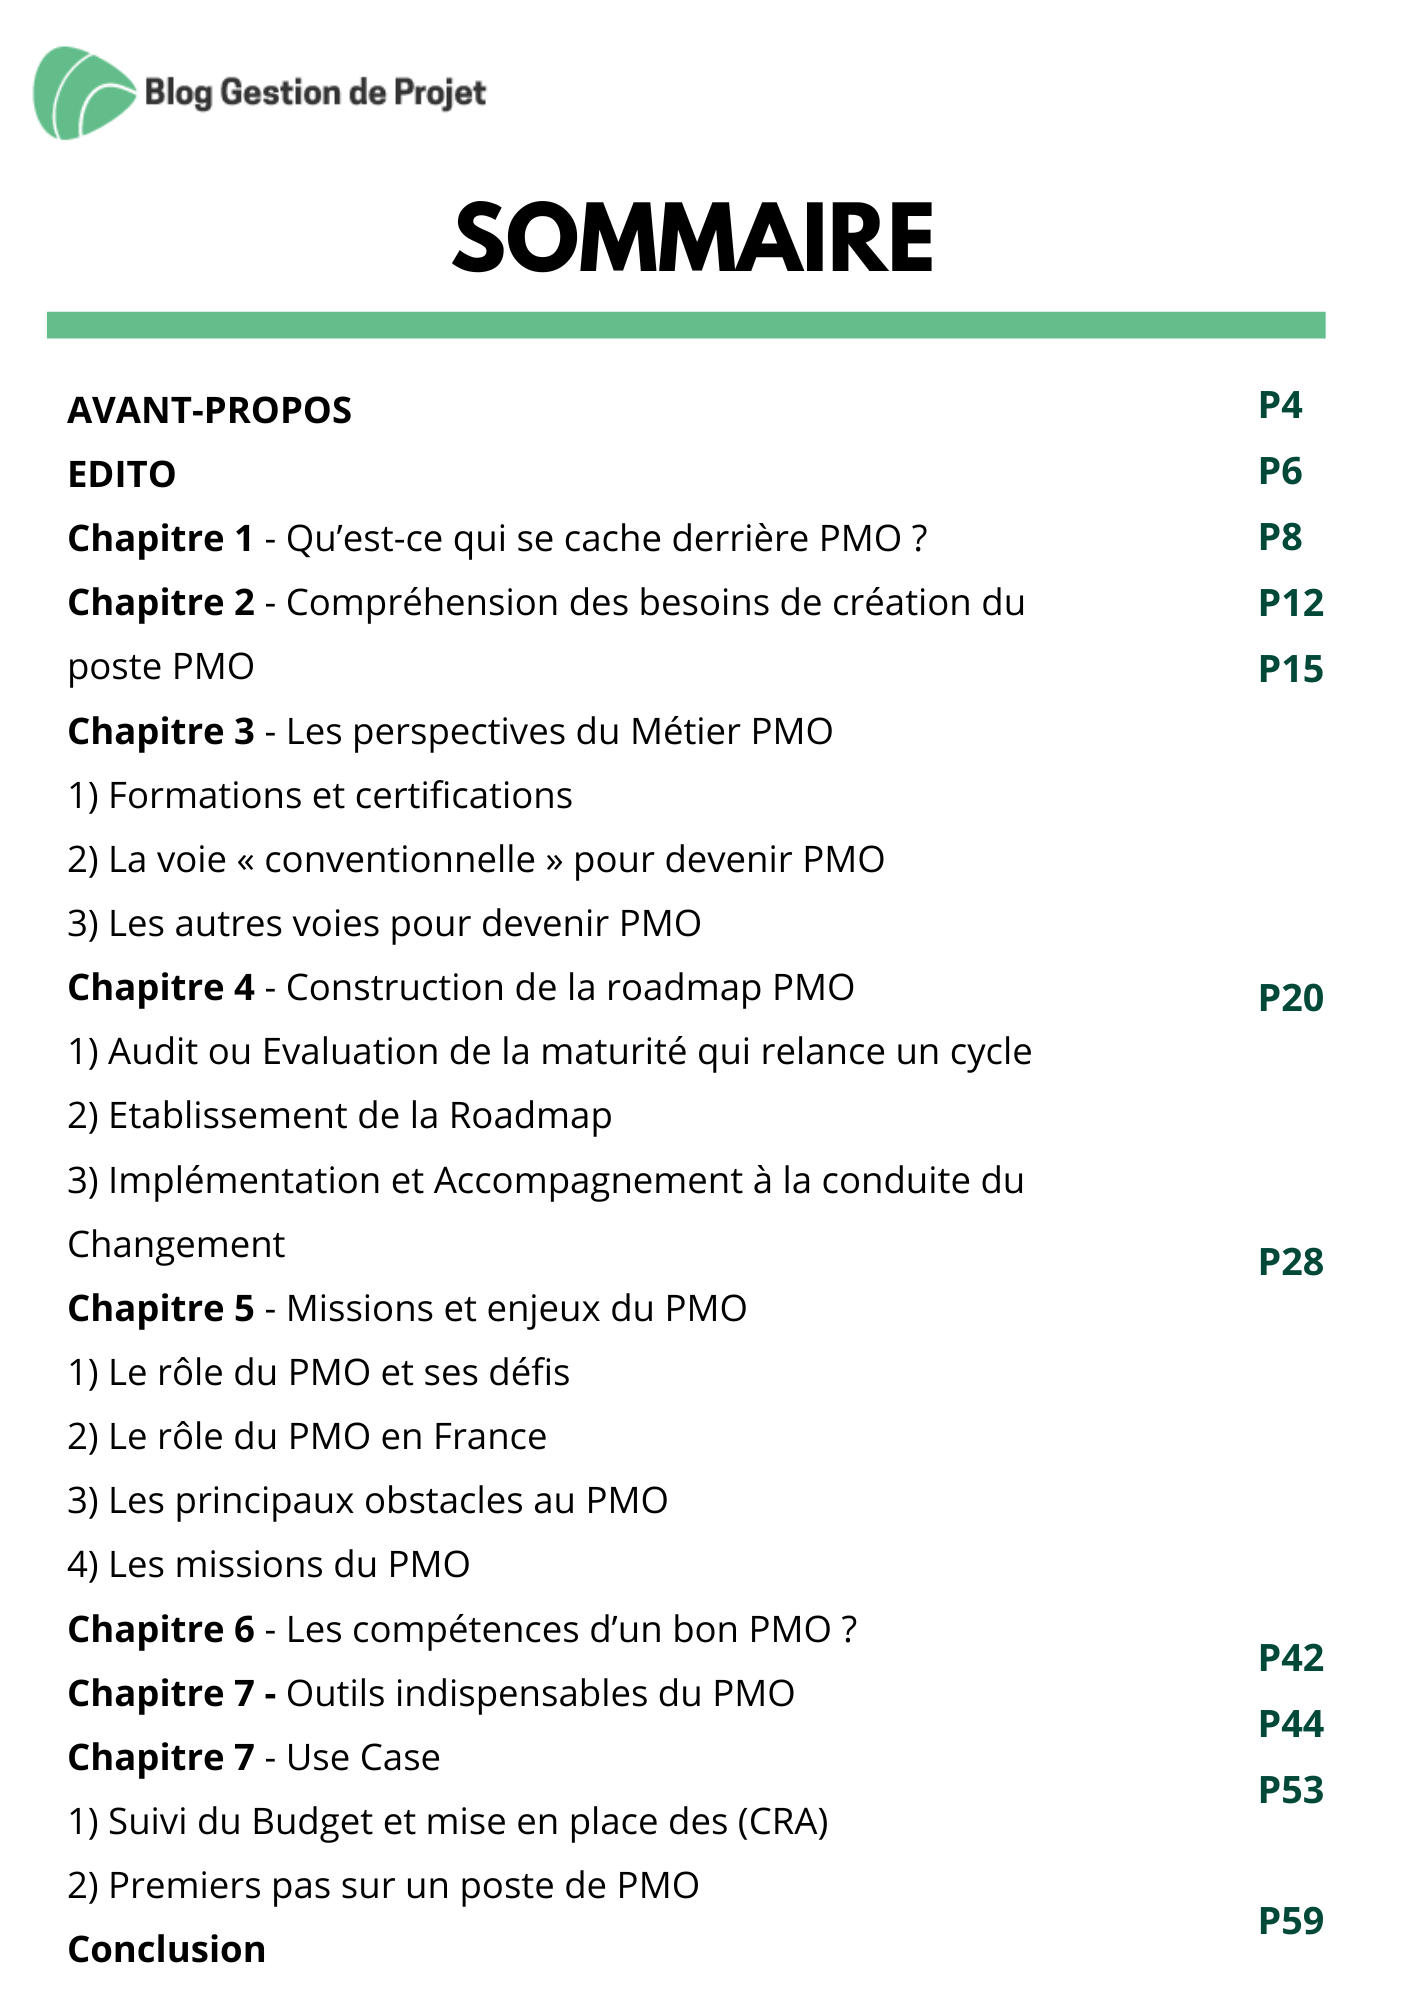 Sommaire Guide PMO